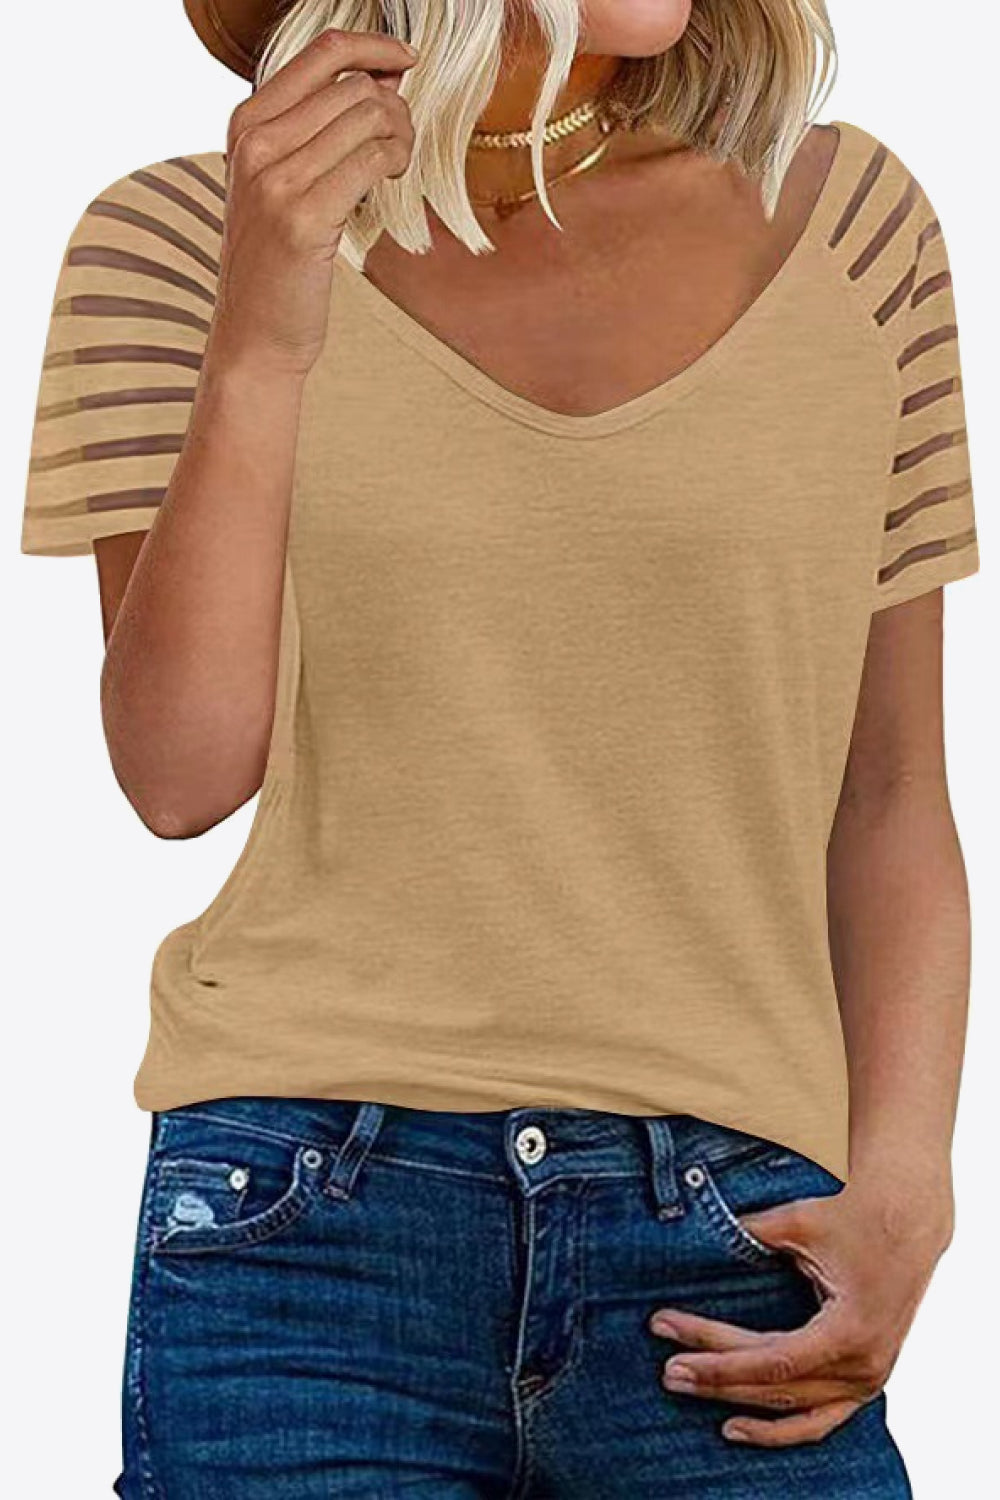 Tan Taupe Coffee Toffee Light Brown Beige Womens Sheer Striped Sleeve Tee in 8 colors, Very Highly Stretchy Rayon Spandex Blend Fabric Material, True to Size Fit, Shortsleeve Tee, V-Neckline